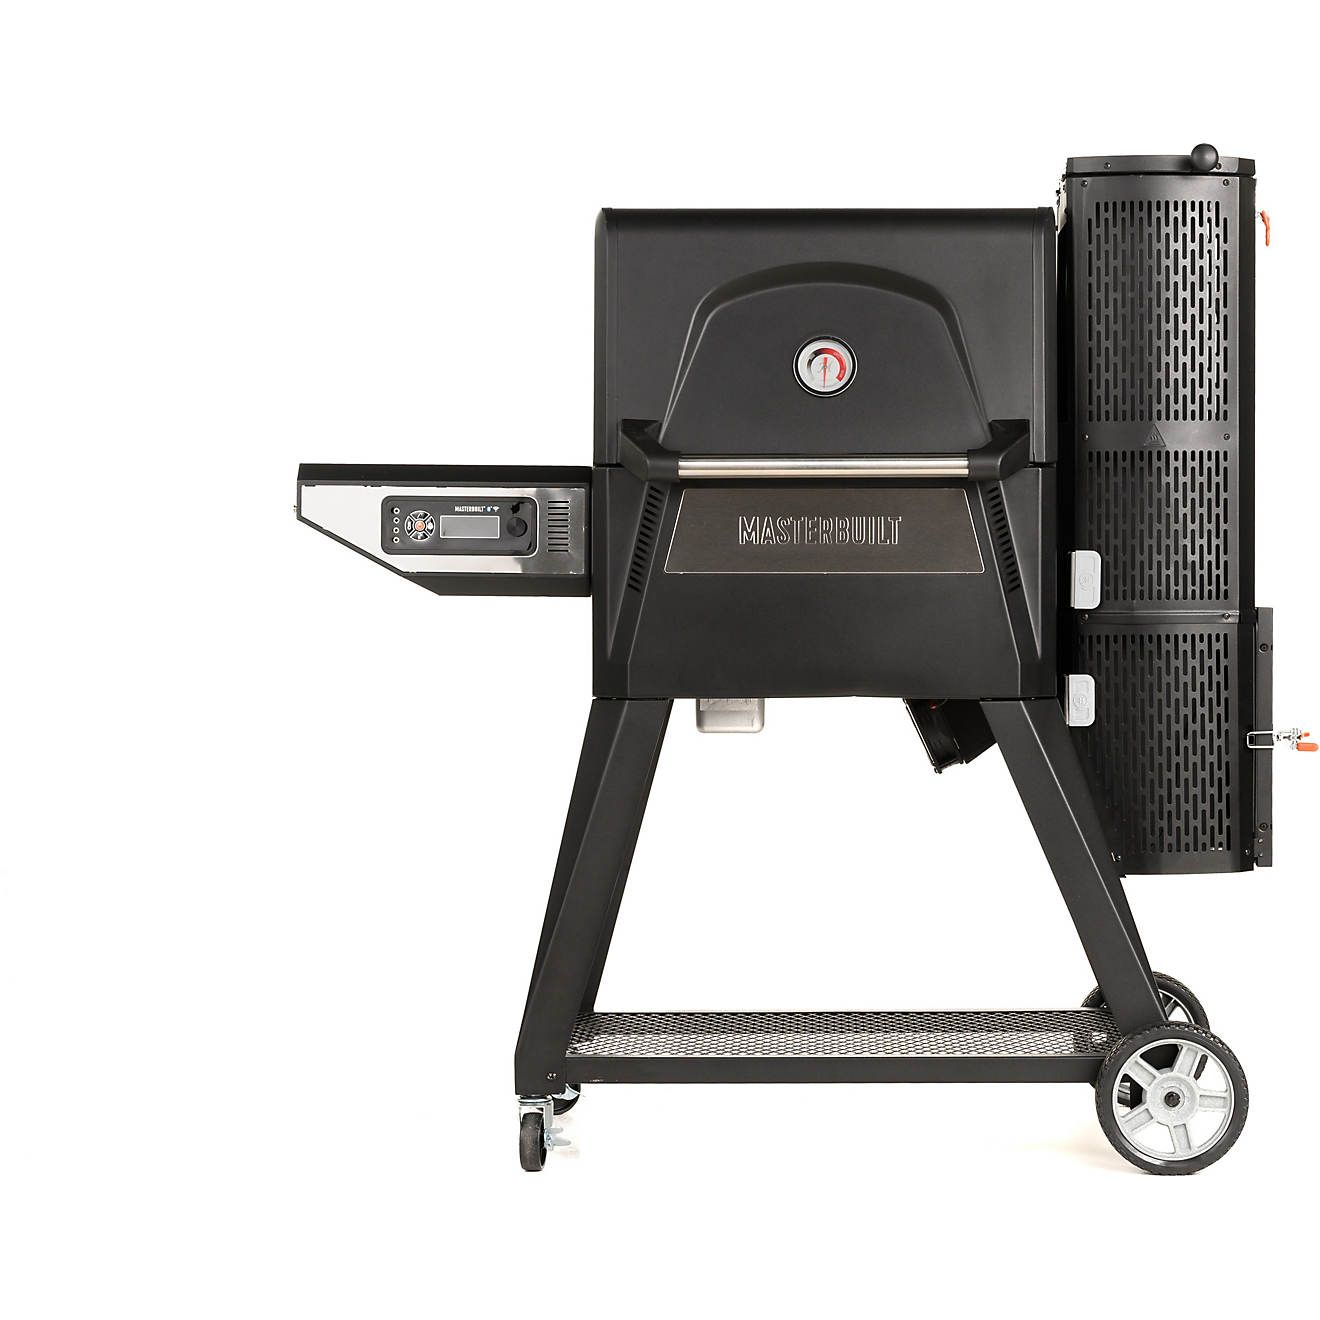 Masterbuilt Gravity Series 560 Digital Charcoal Grill & Smoker | Academy Sports + Outdoor Affiliate